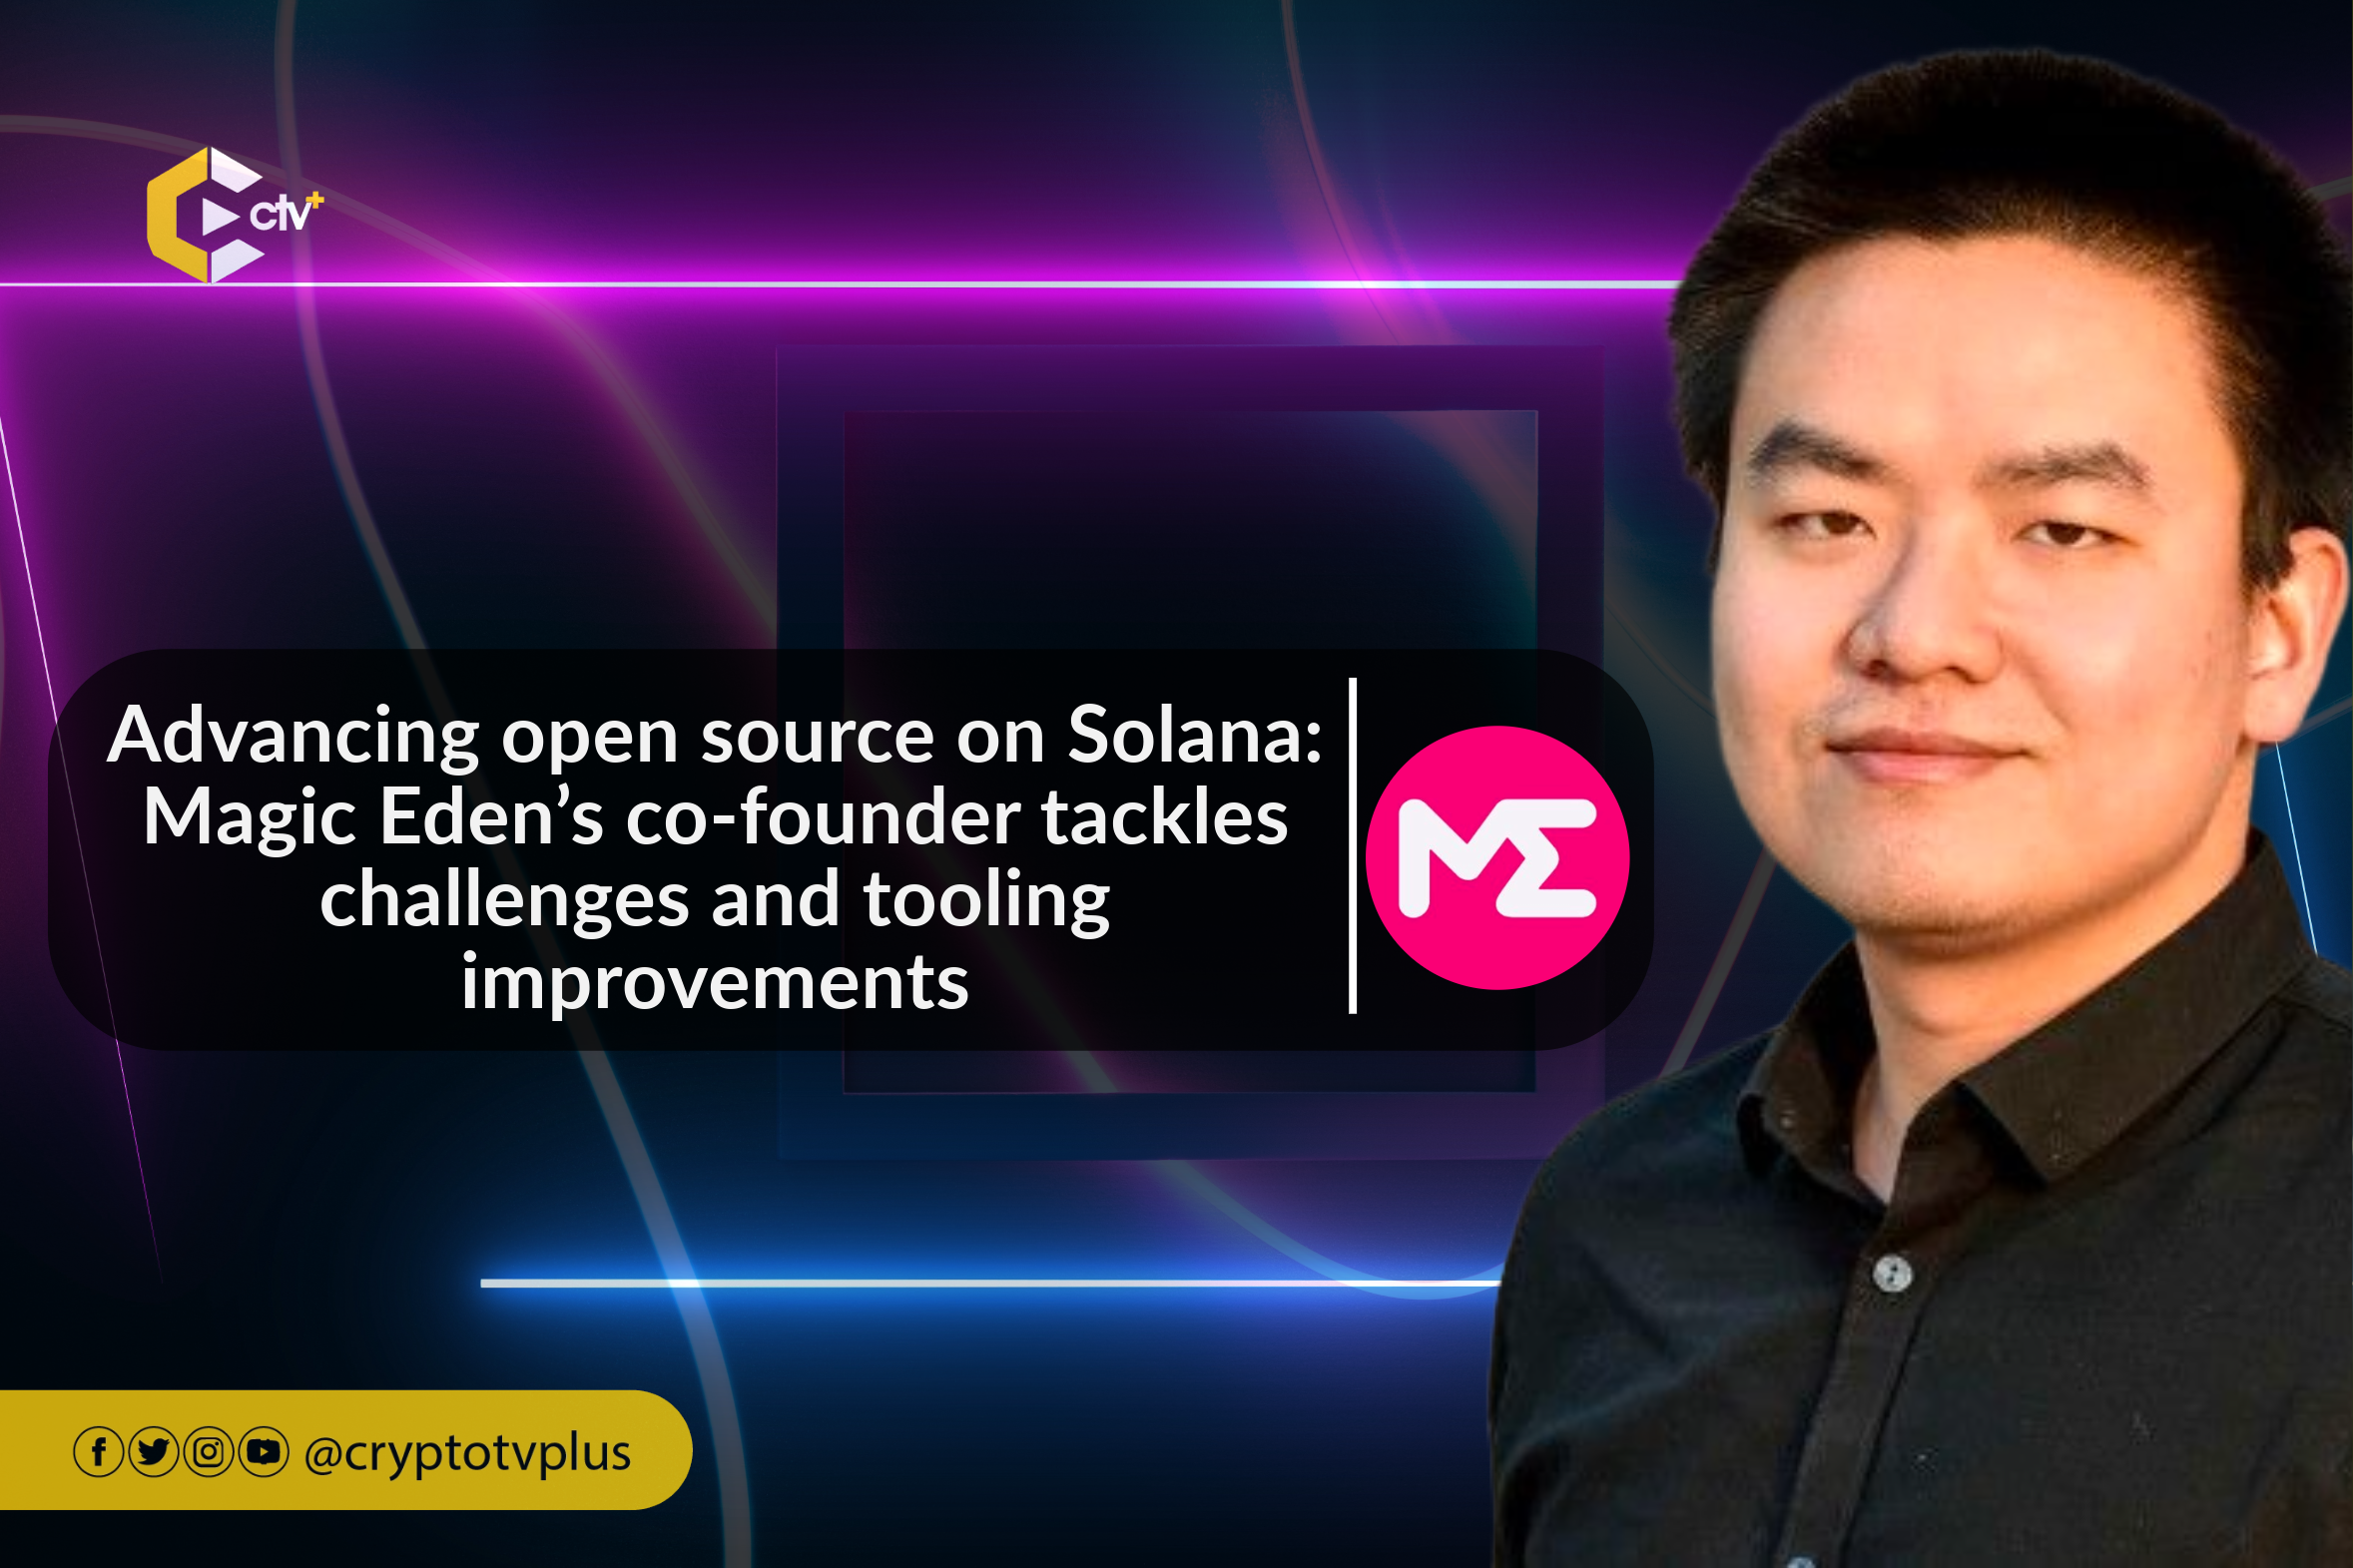 Explore Solana's ecosystem and open-source collaboration. Gain insights into web3 decentralization, standardization, and regulation.